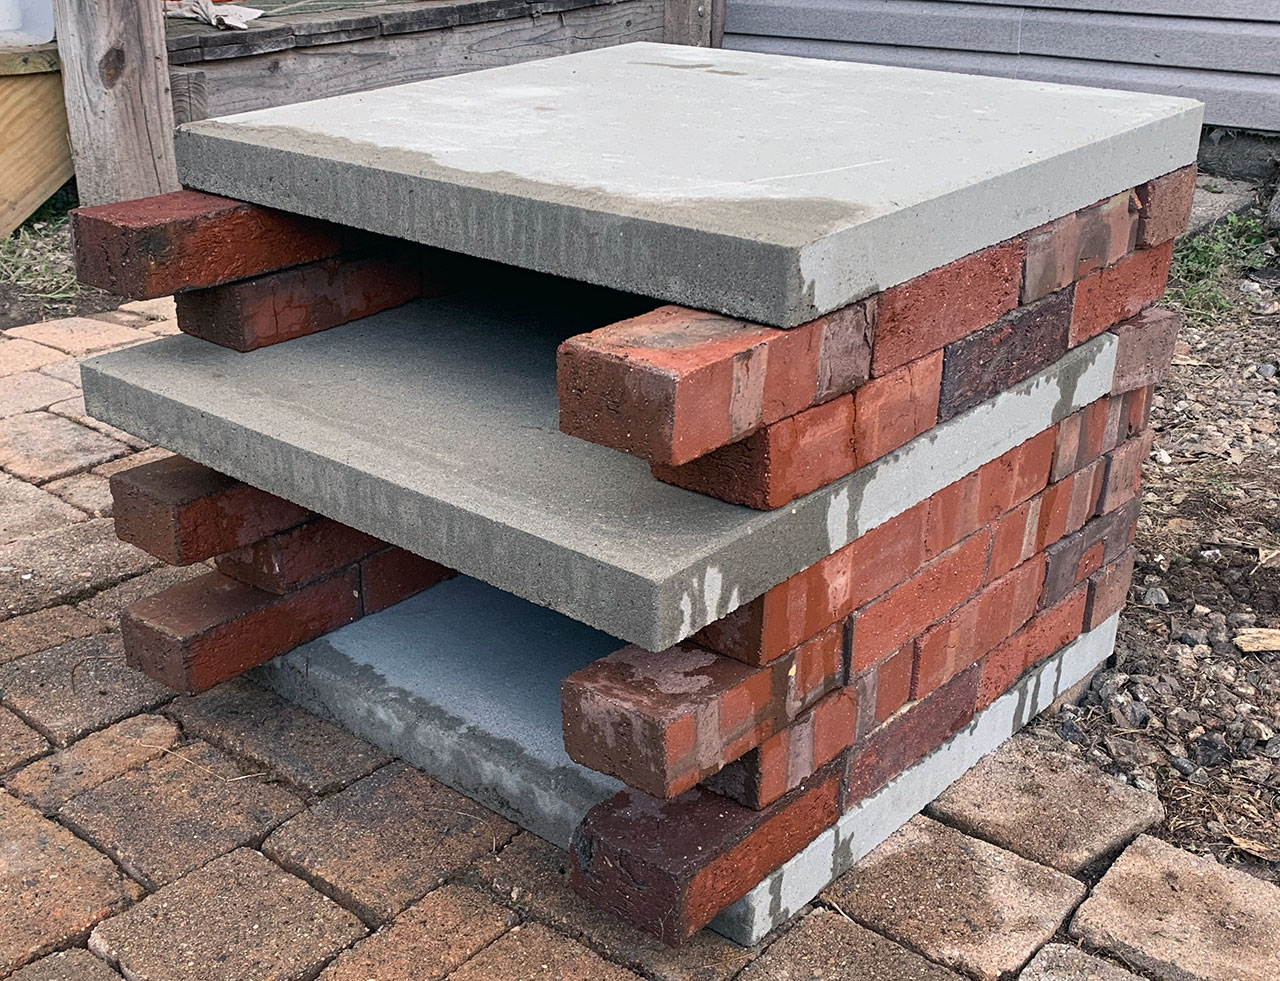 Brick oven for pizza